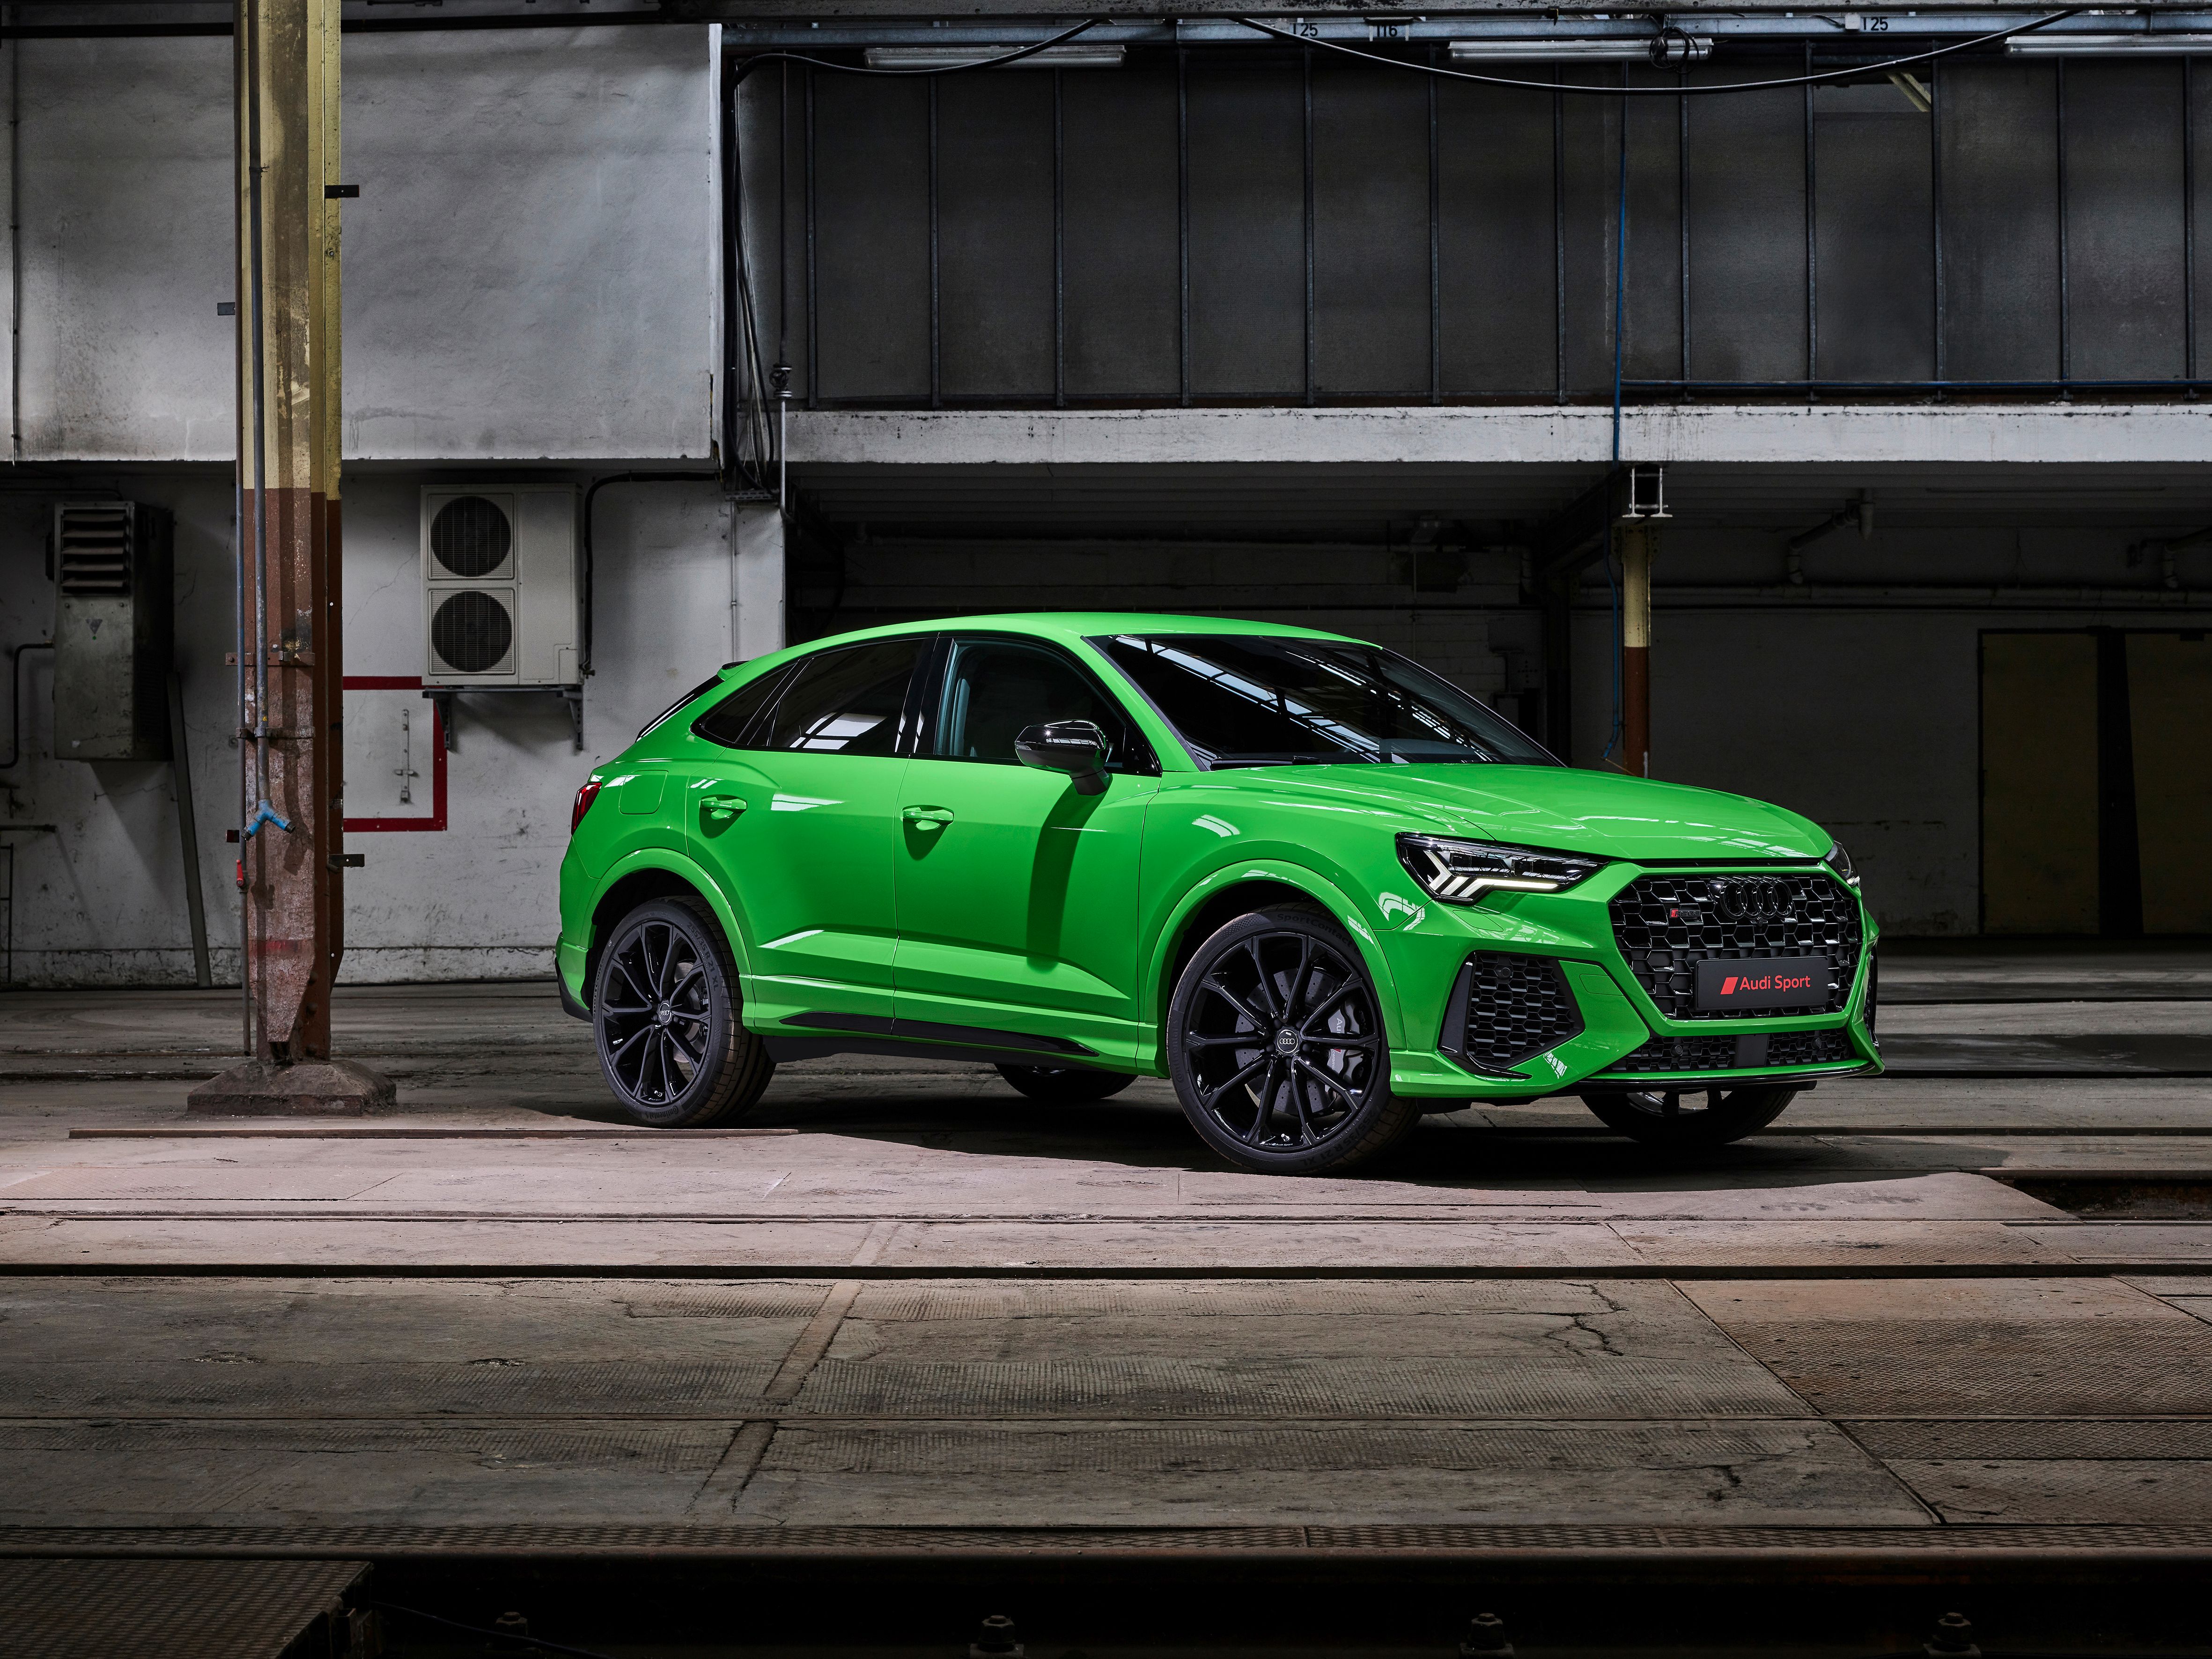 2019 The 2020 Audi RS Q3 Now Has a Sportier Friend You Might Be Interested In